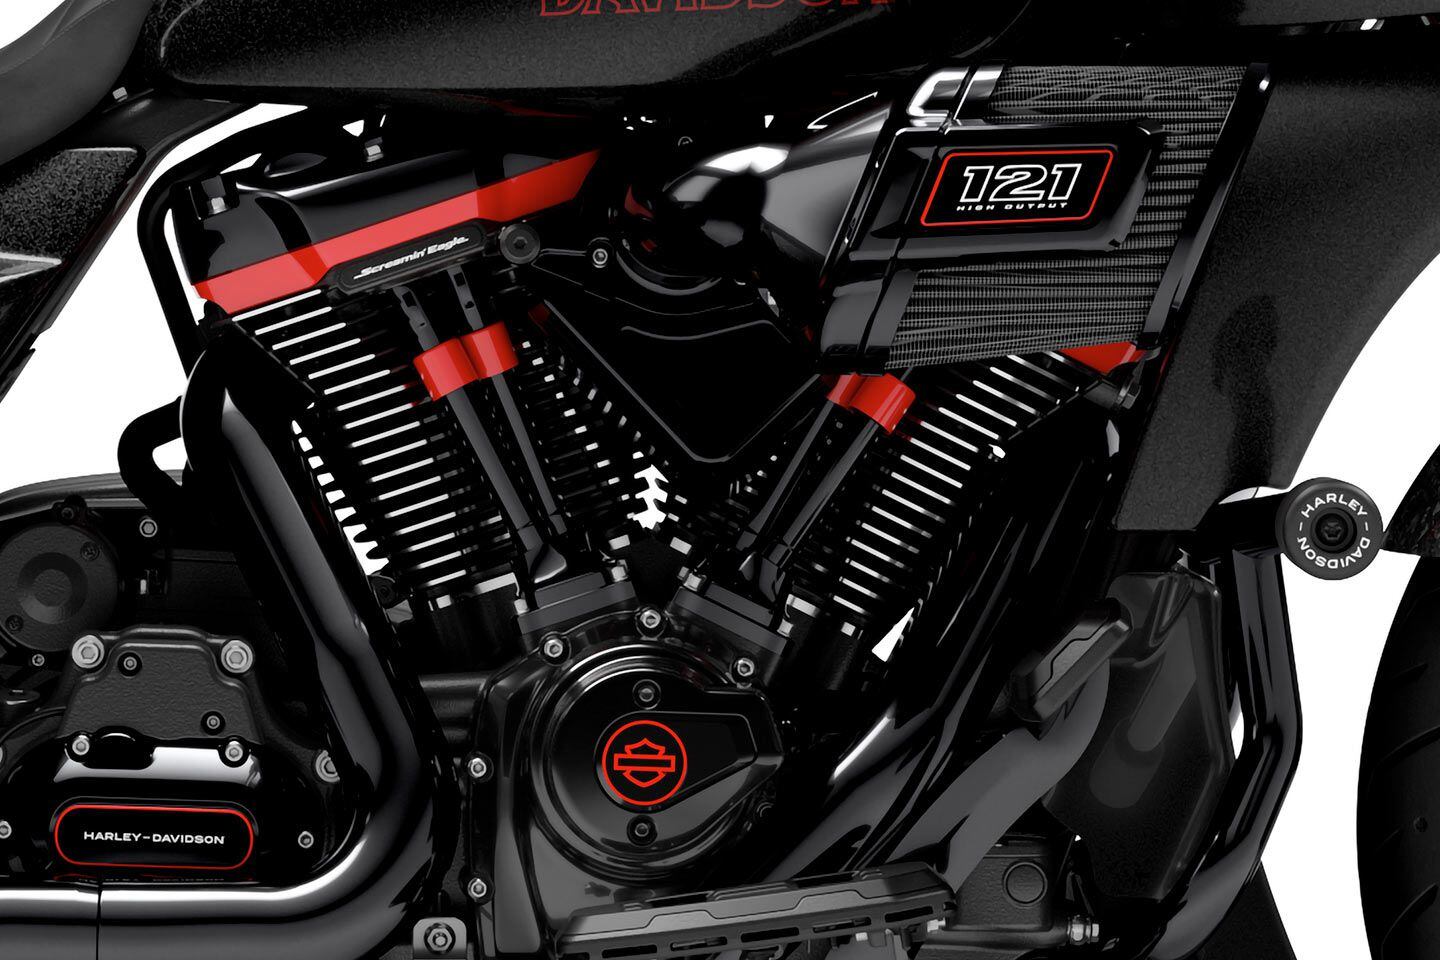 The Milwaukee-Eight 121 VVT is The Motor Company’s latest flagship Big Twin.